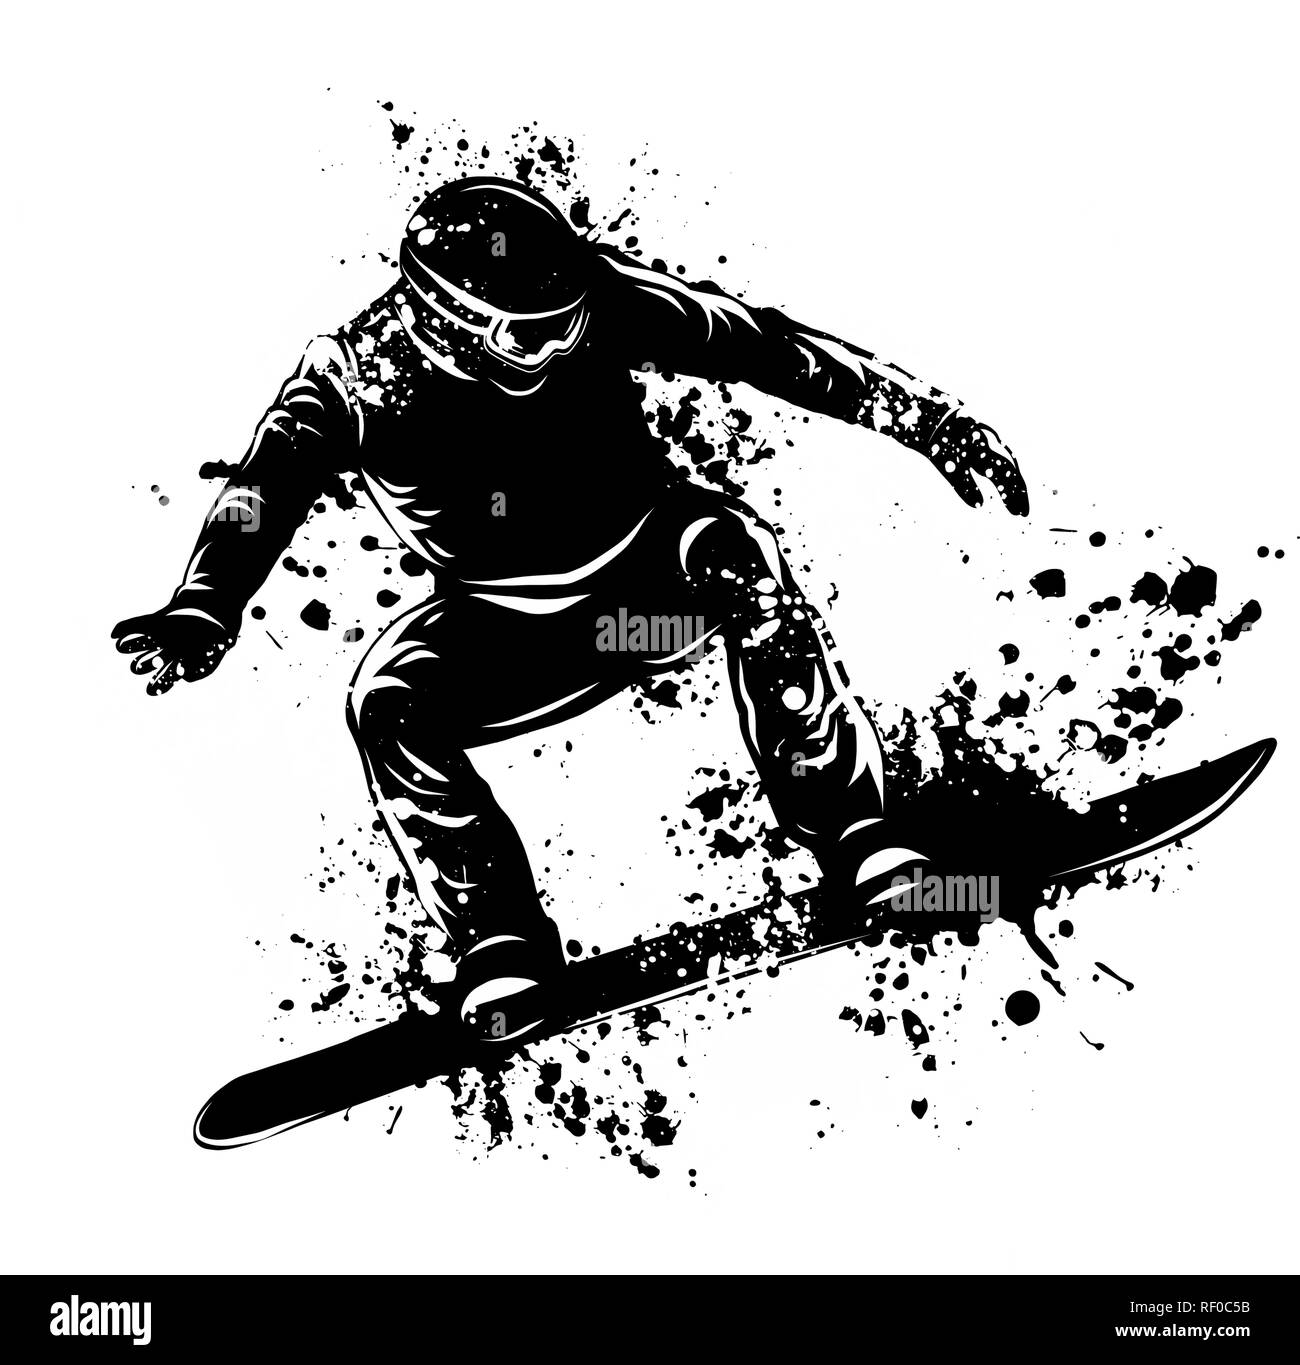 Silhouette of a snowboarder jumping. Vector illustration Stock Vector